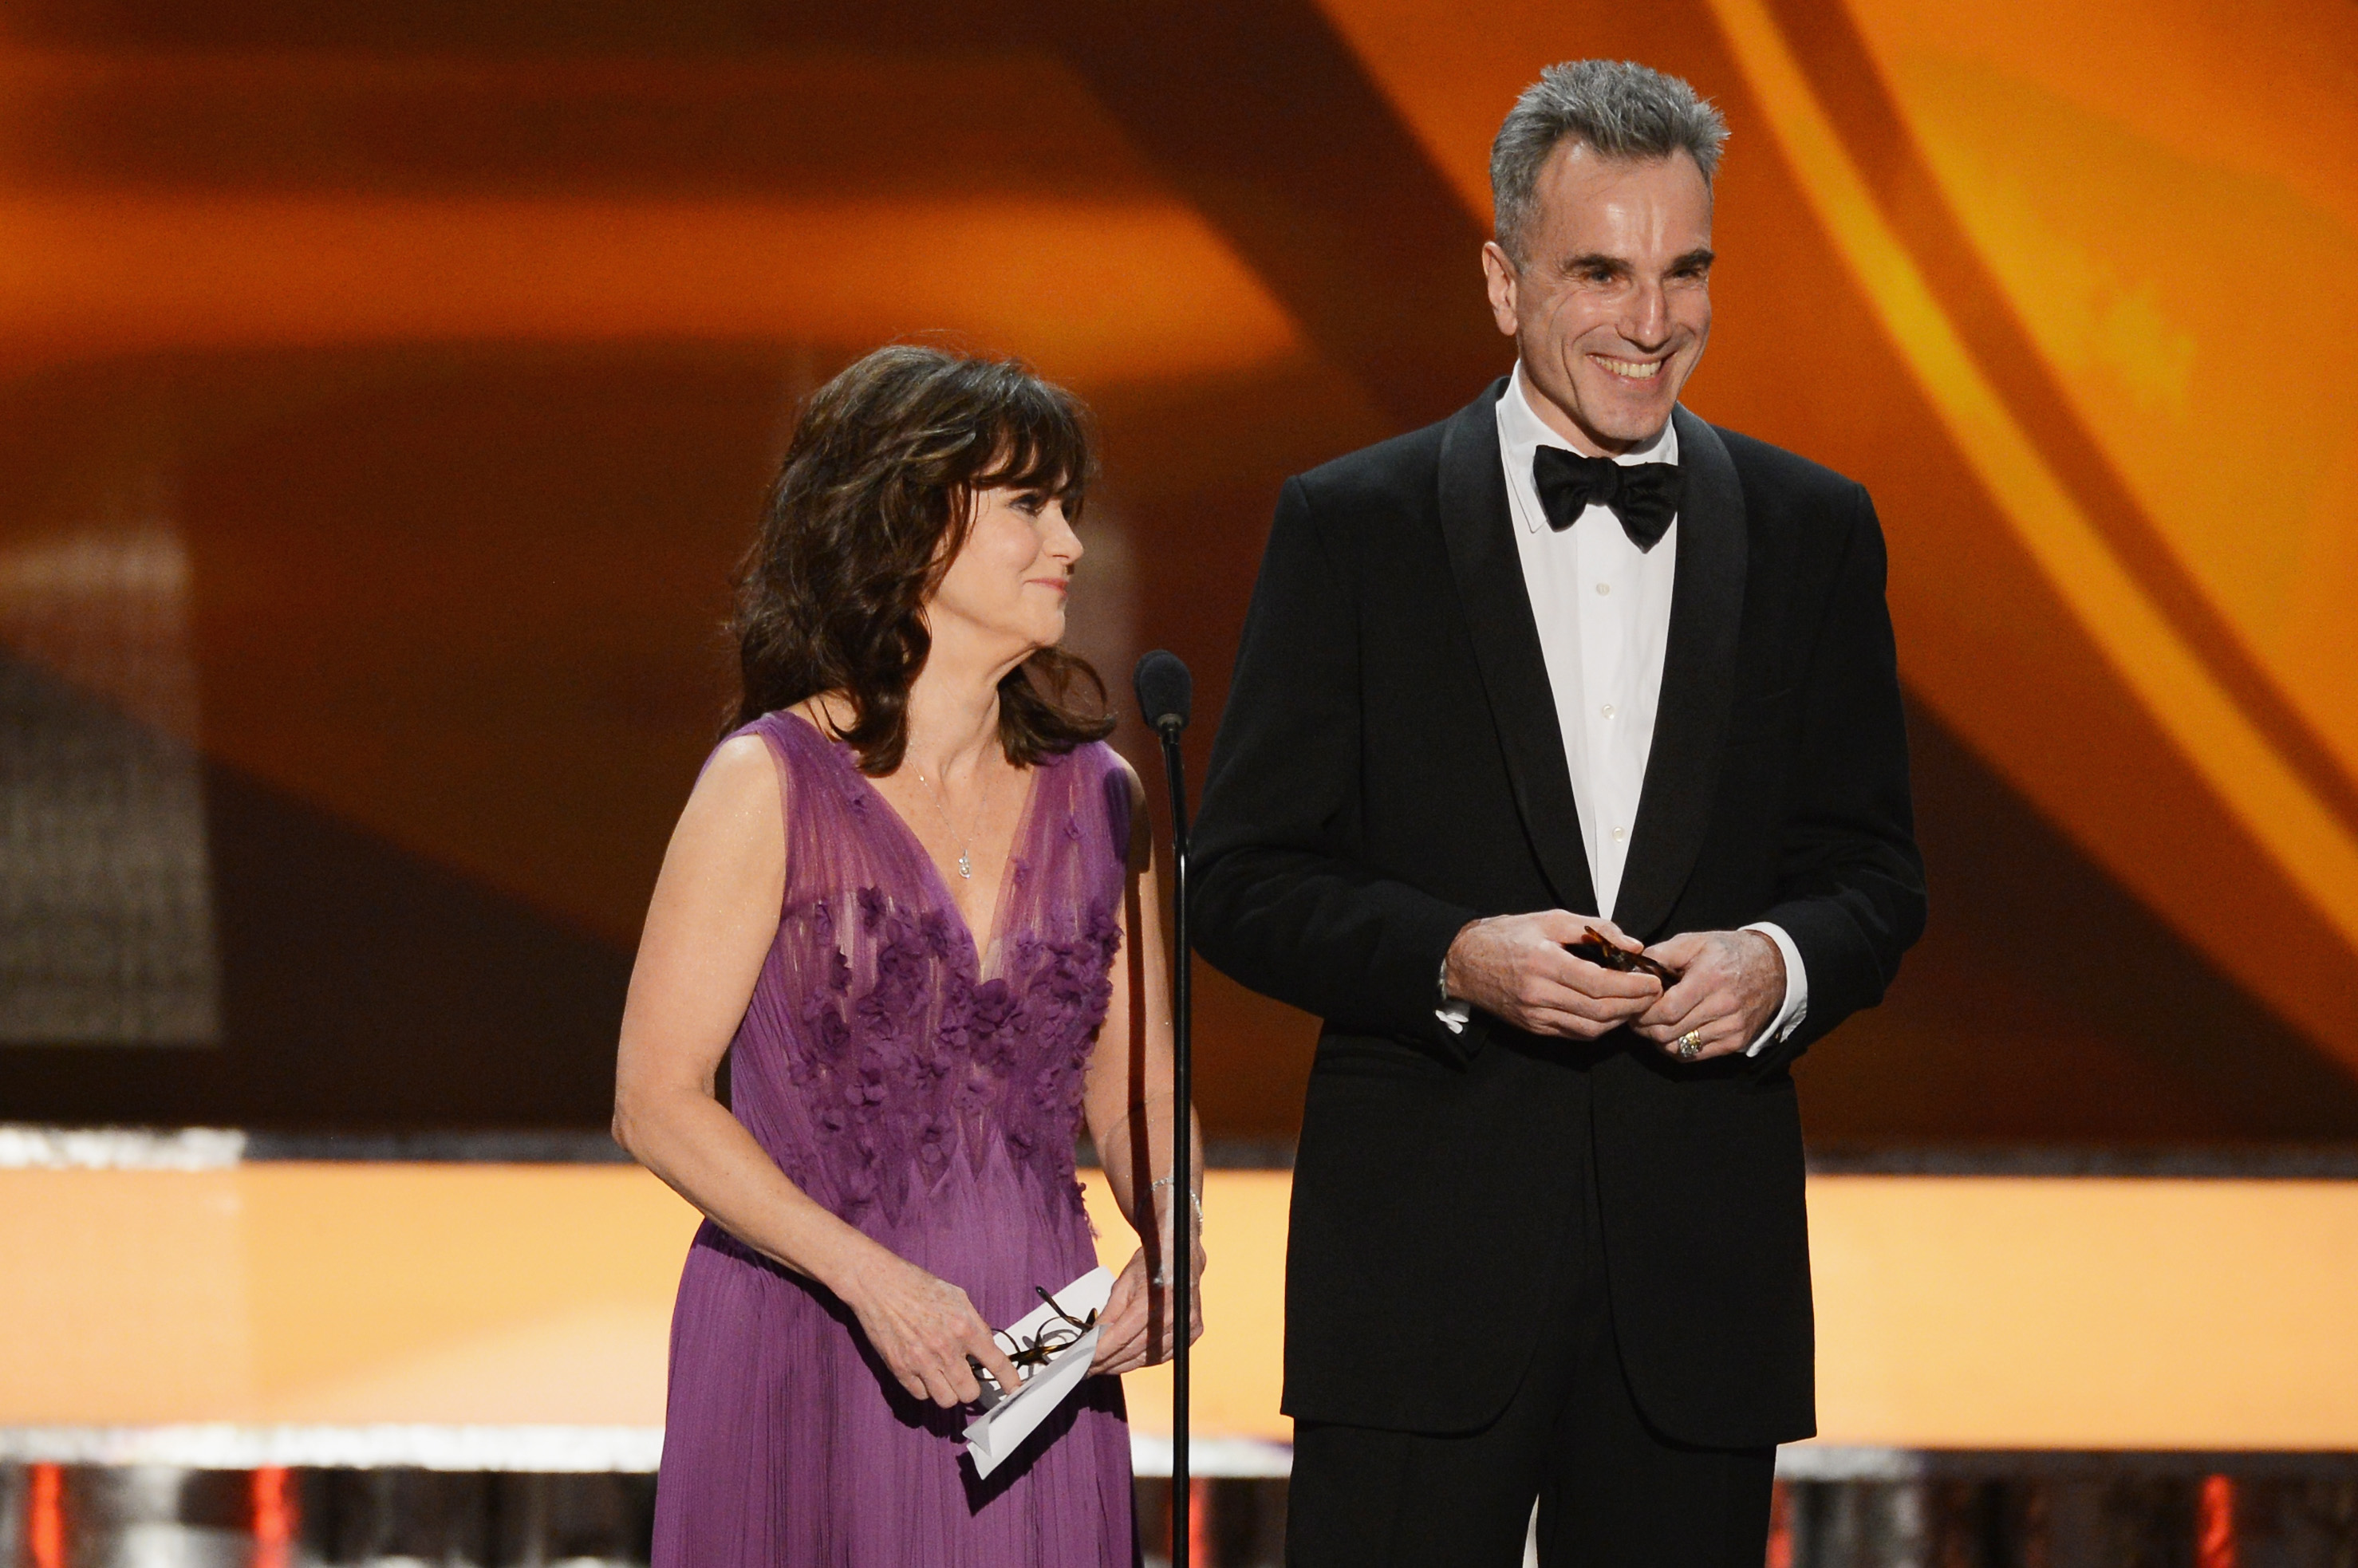 SAG Awards Adorably Played, Sally Field and Daniel Day-Lewis